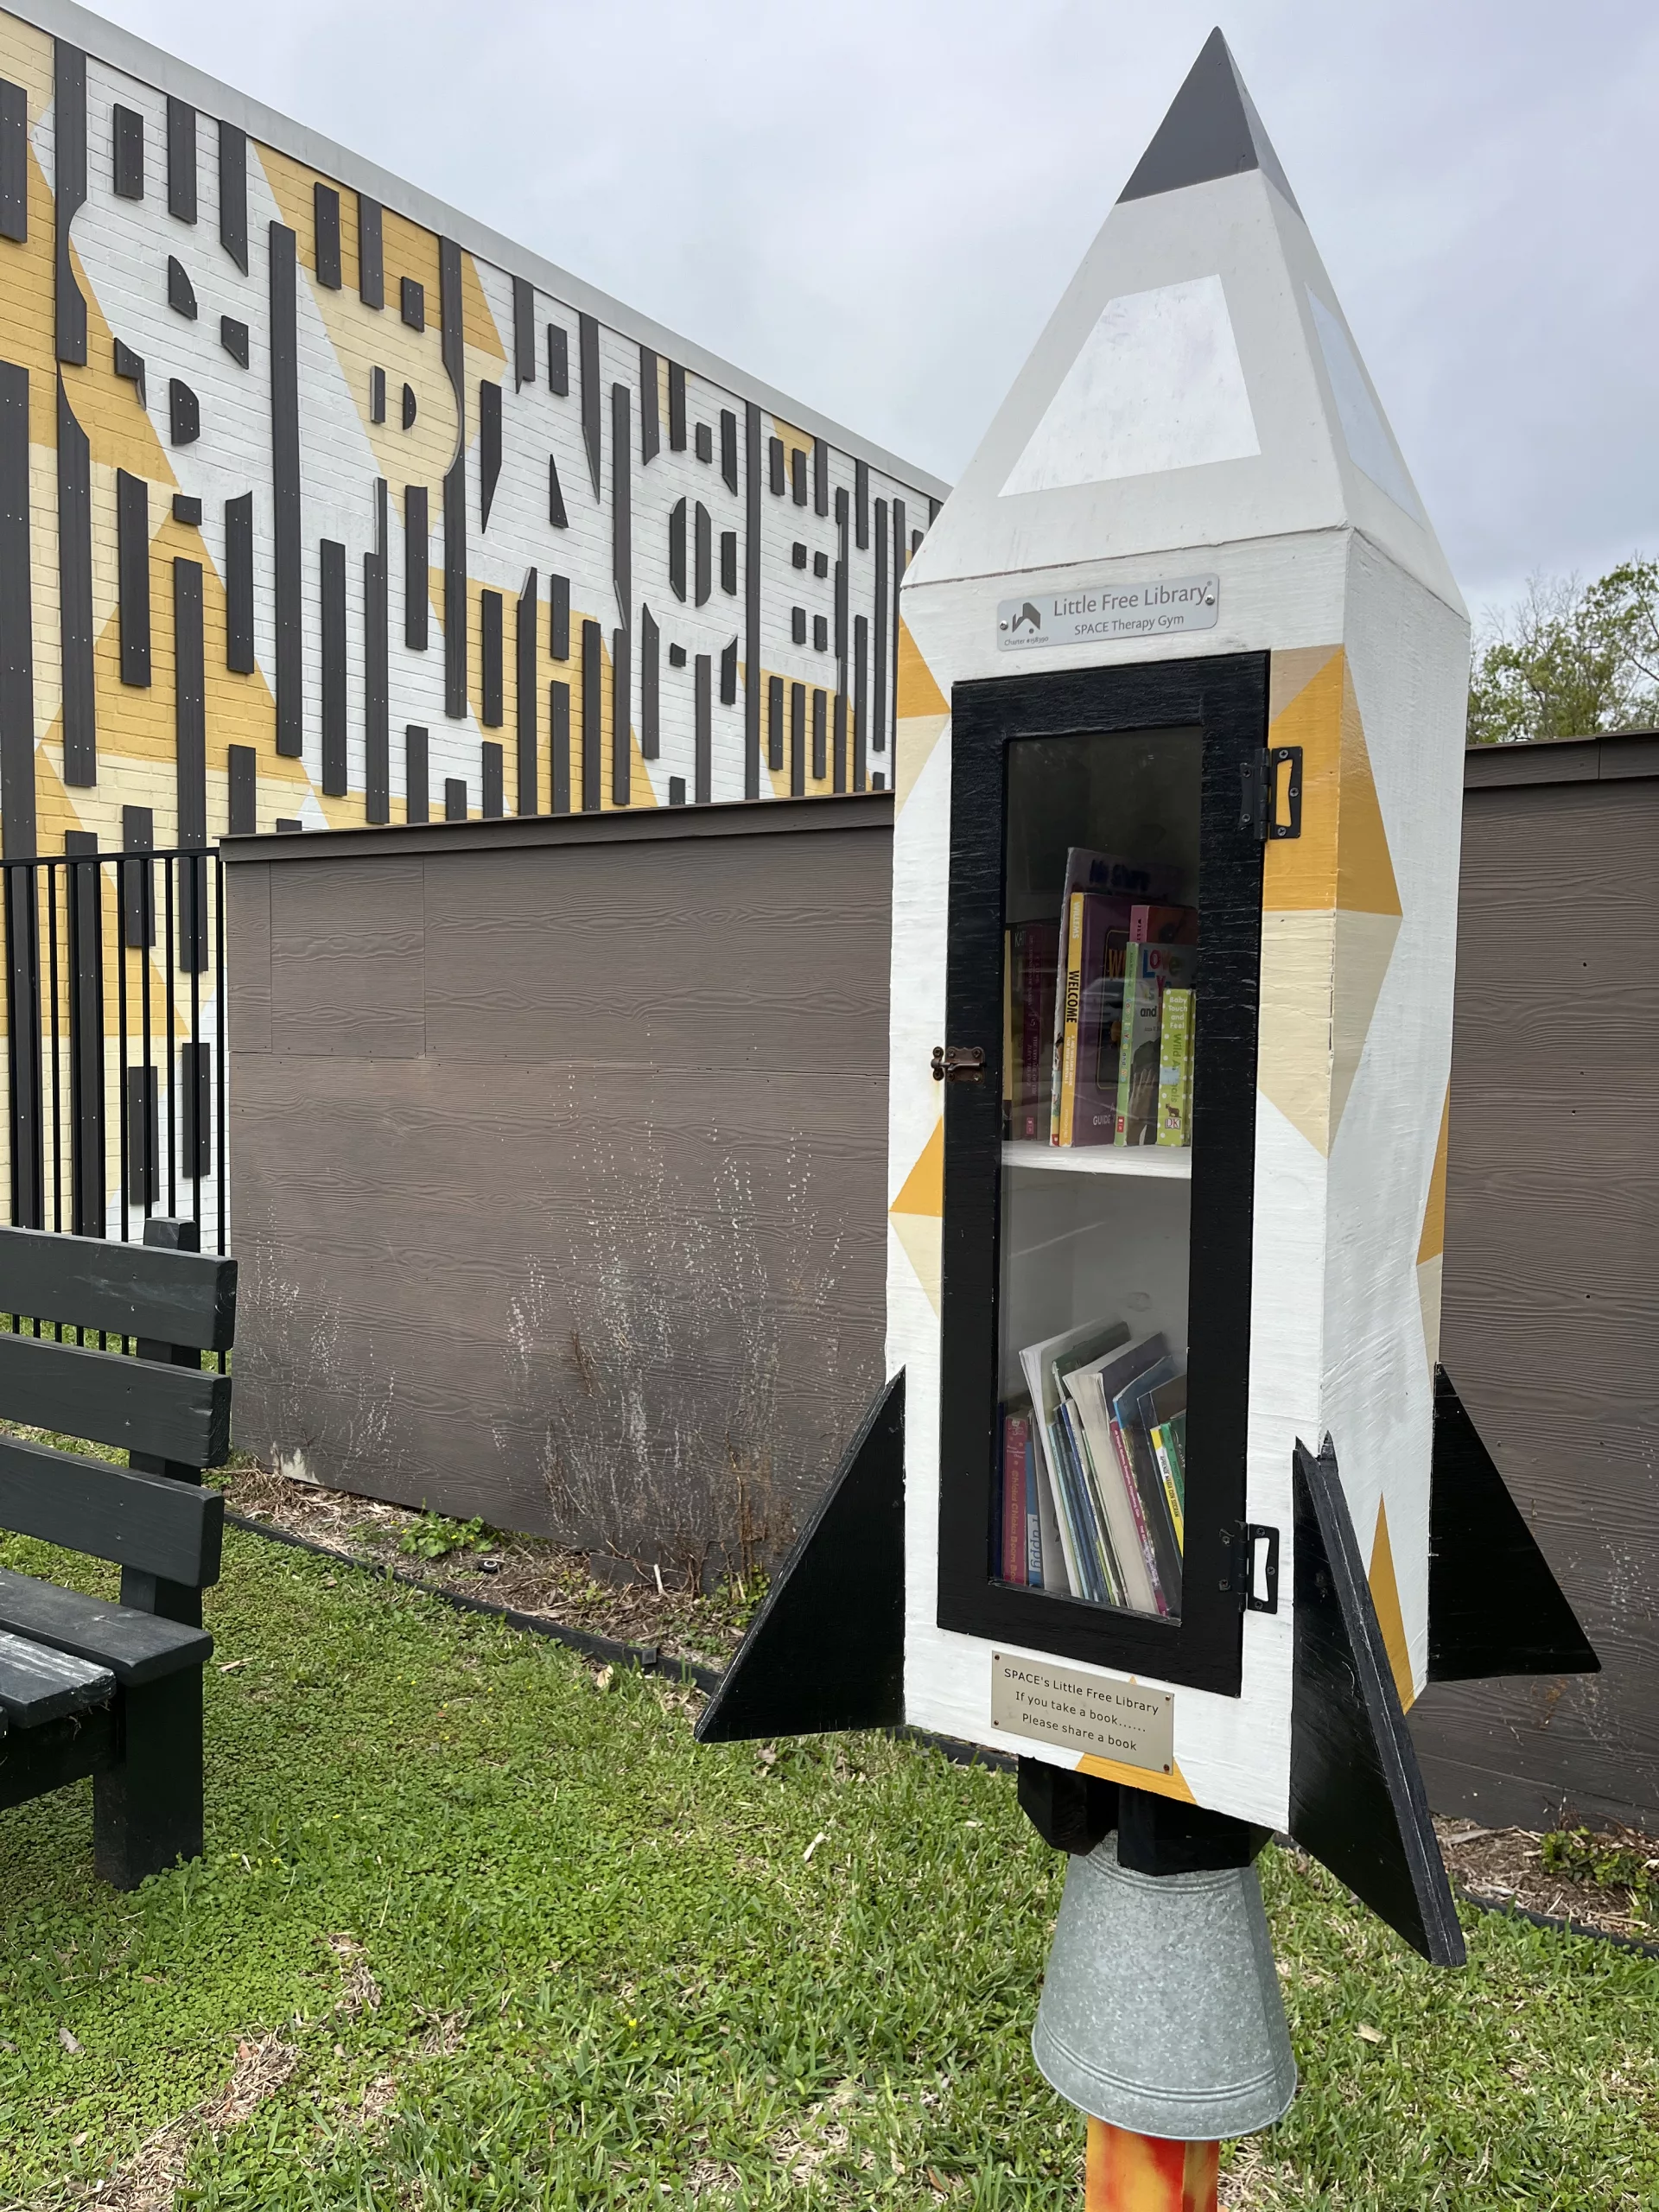 space shuttle shaped little free library